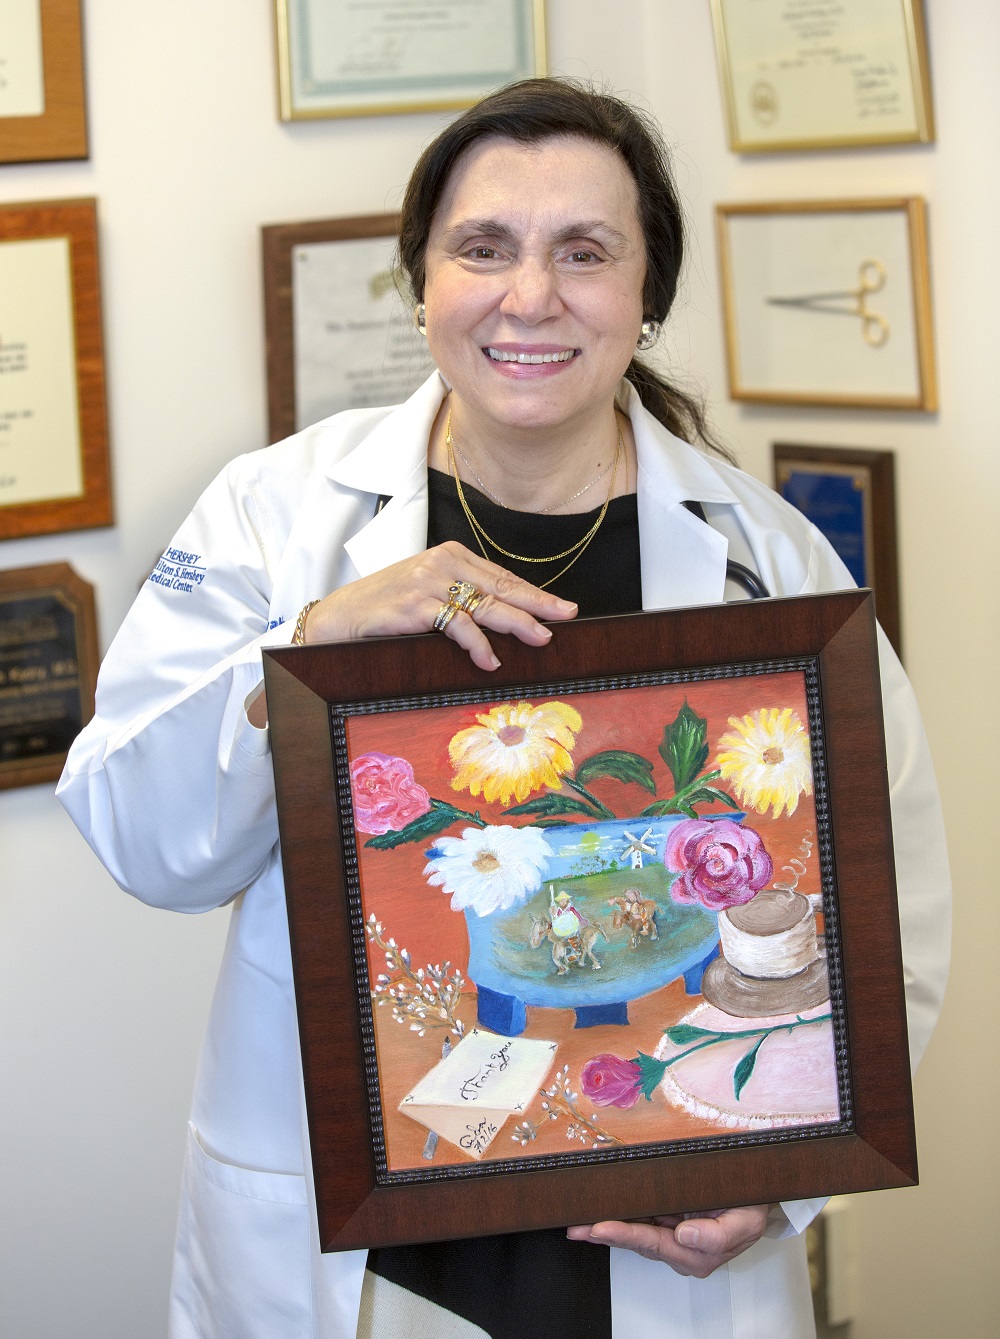 Dr. Zakiyah Kadry of Hershey Medical Center holds an oil painting created for her by a patient. She is wearing a white lab coat, top and gold necklace. The painting is in a wooden frame and shows flowers, Don Quixote, a coffee cup and a thank you note. Behind her are diplomas and plaques.